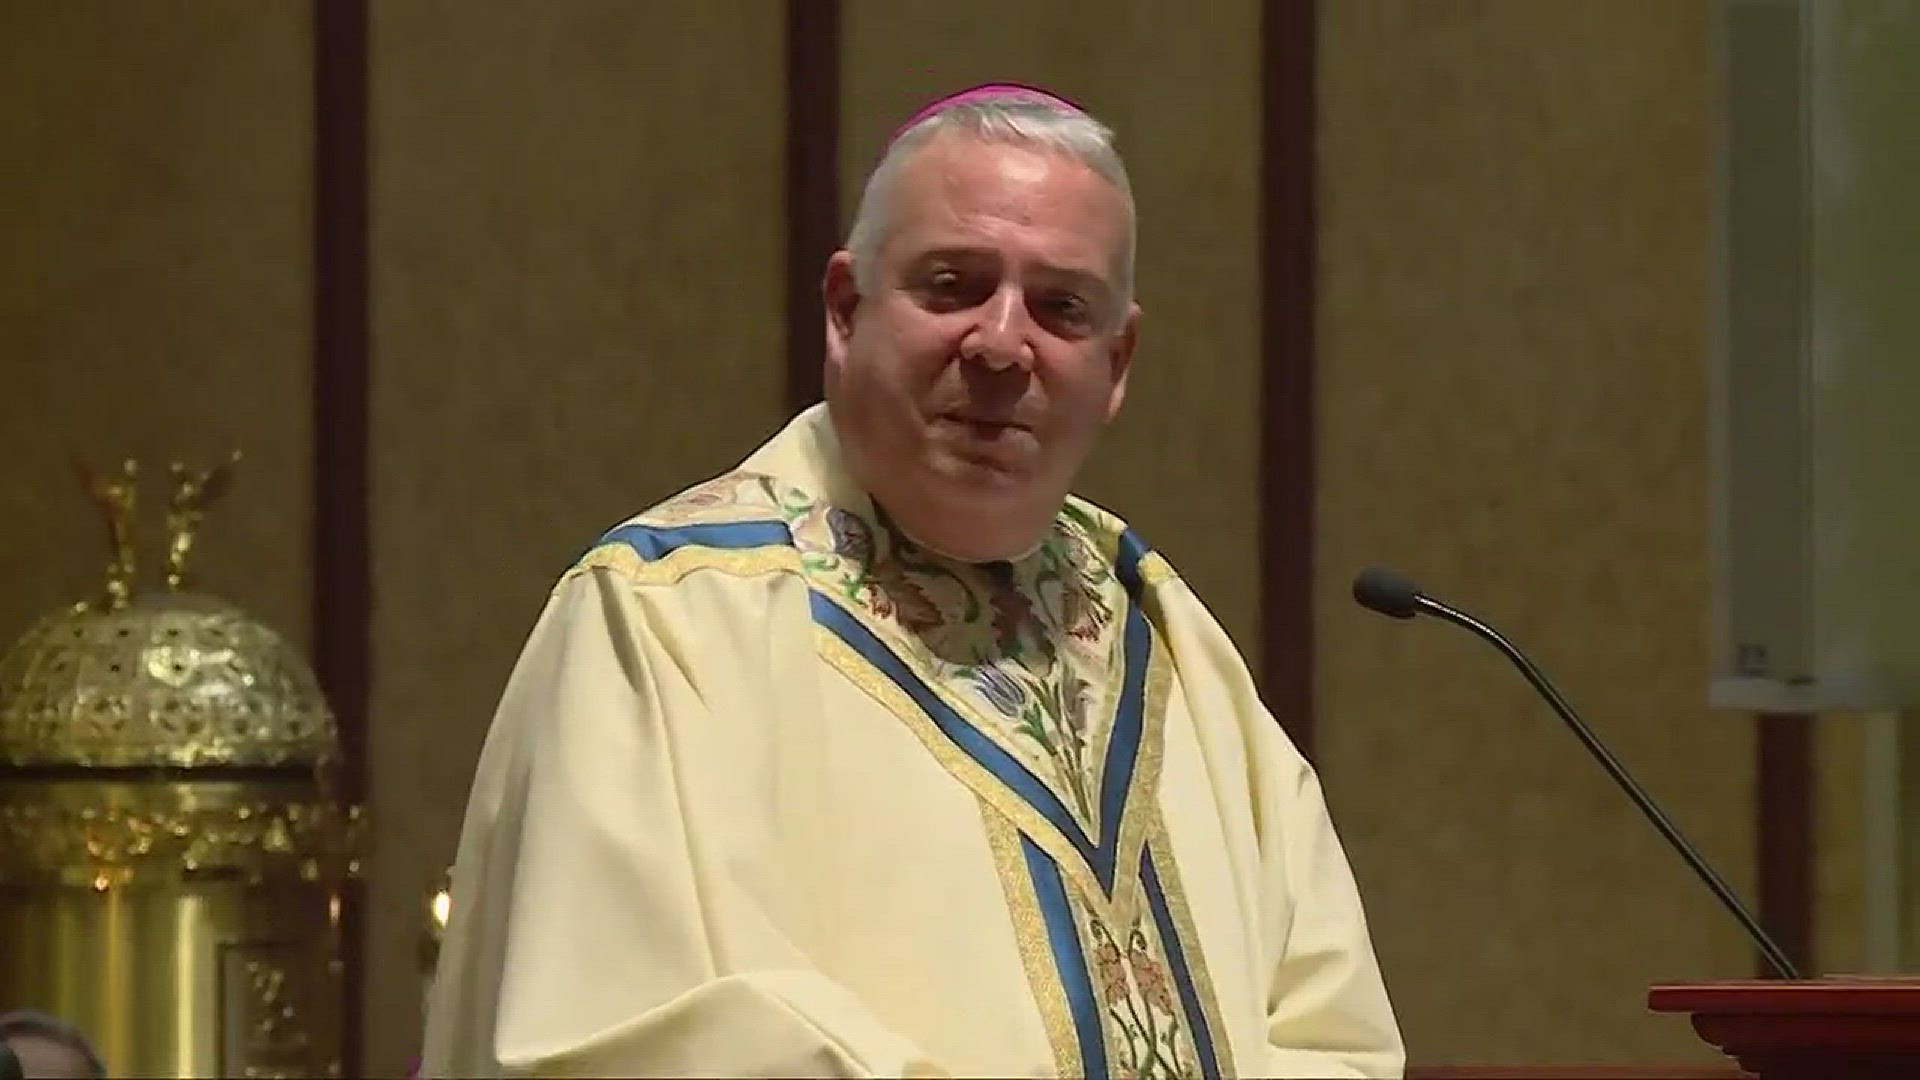 Cleveland Diocese new bishop is officially installed